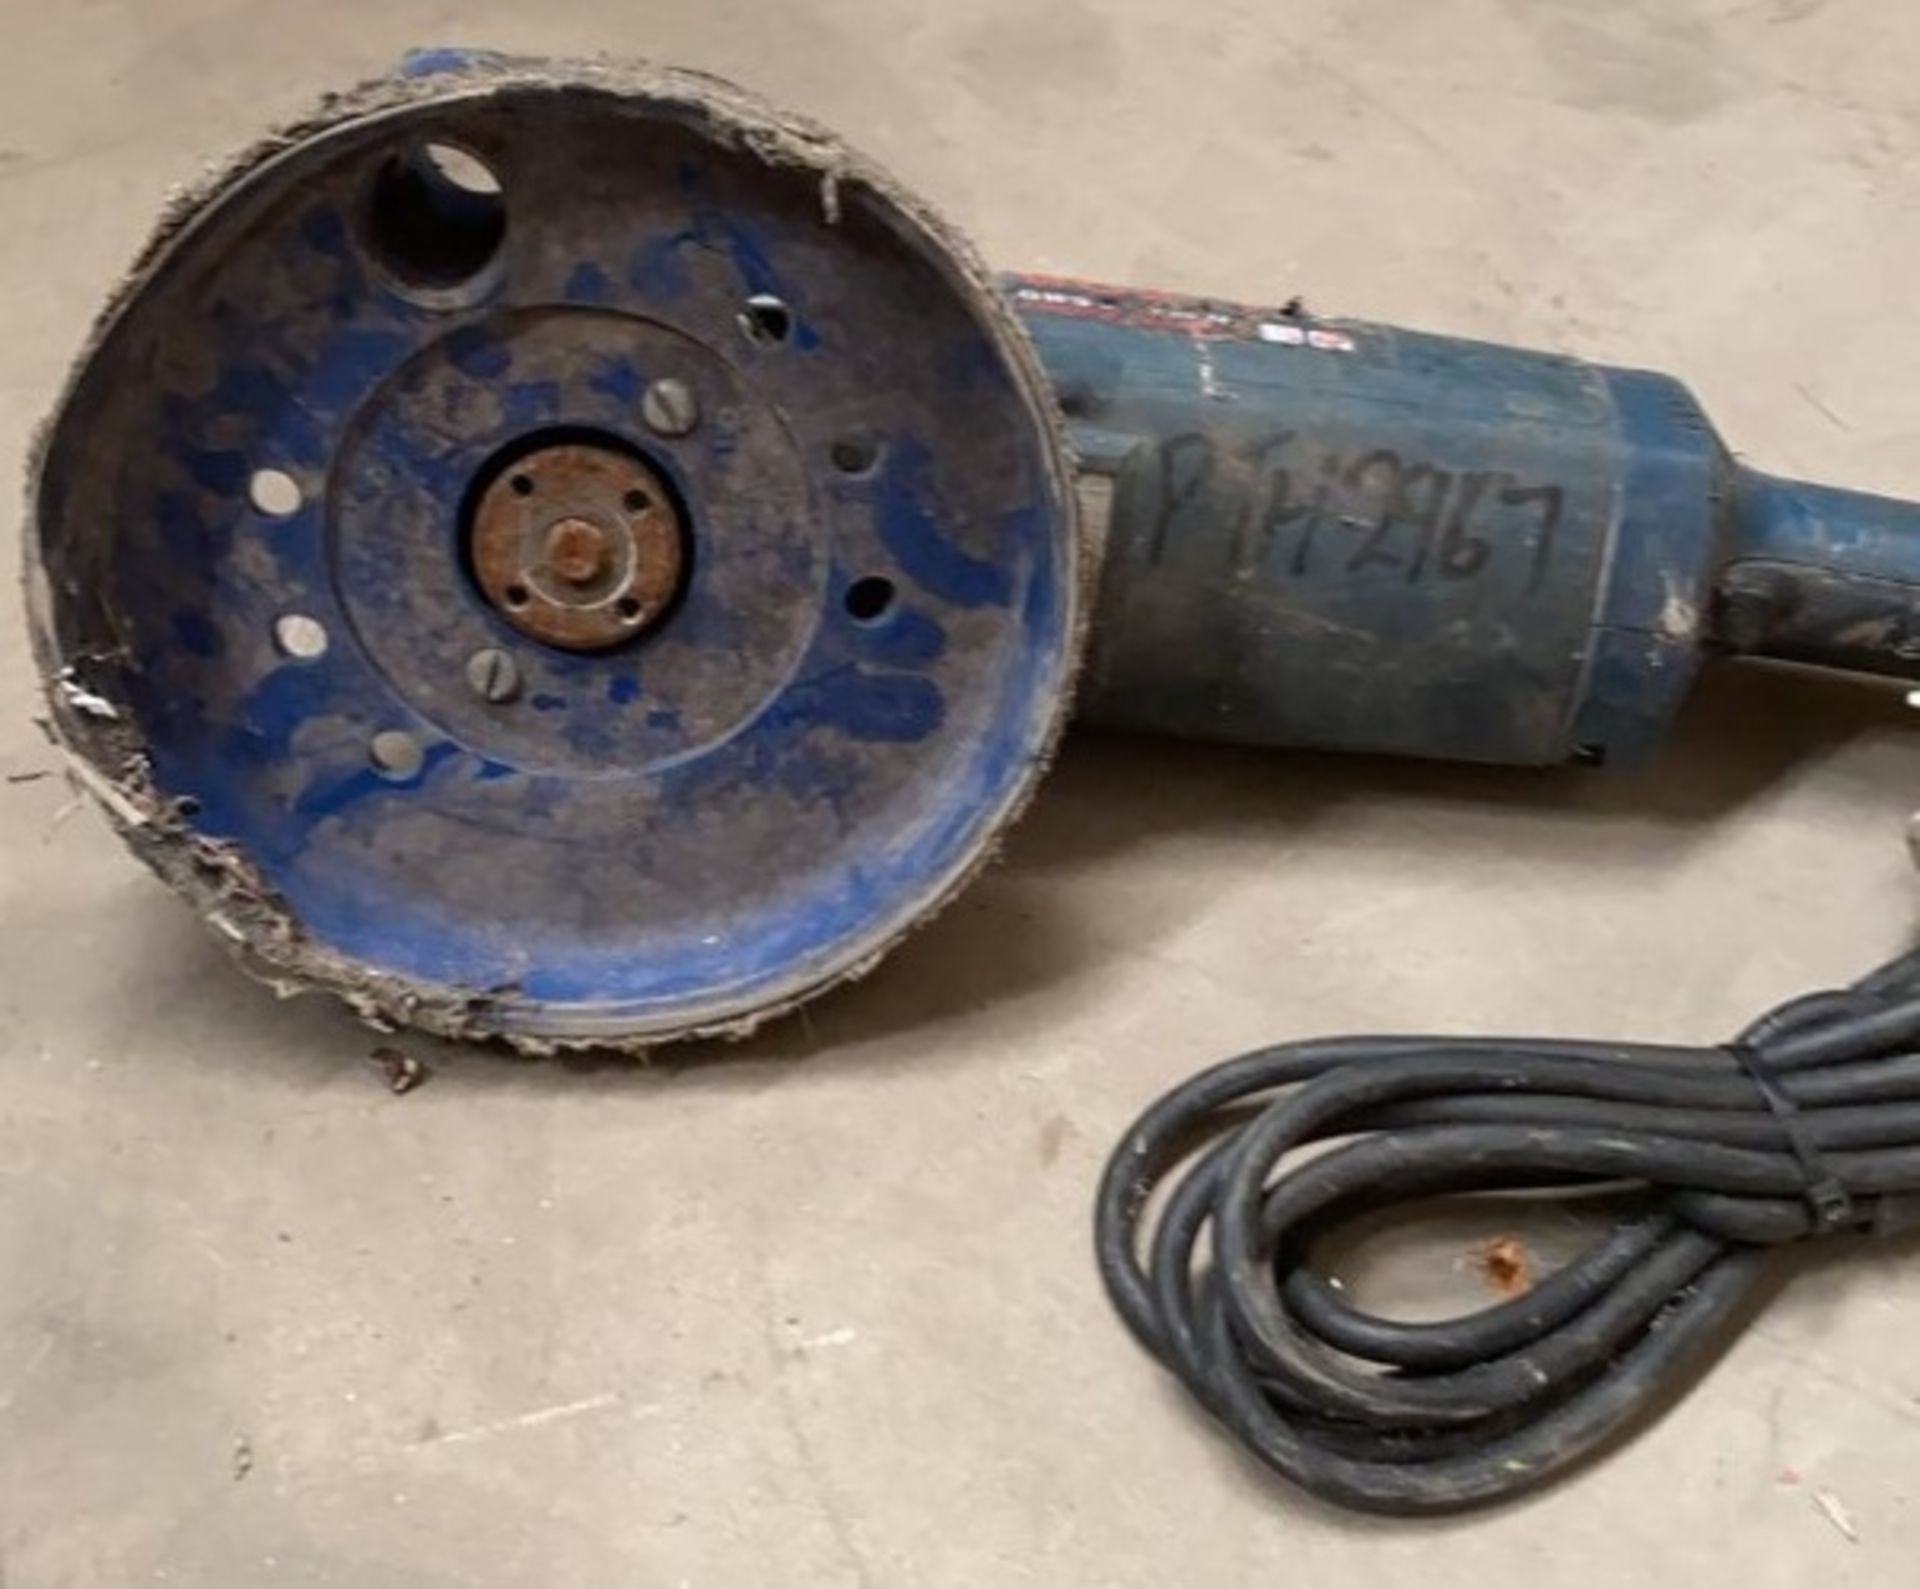 1 x Bosch 110V Grinder - Used, Recently Removed From A Working Site - CL505 - Ref: TL011 - Location: - Image 4 of 4